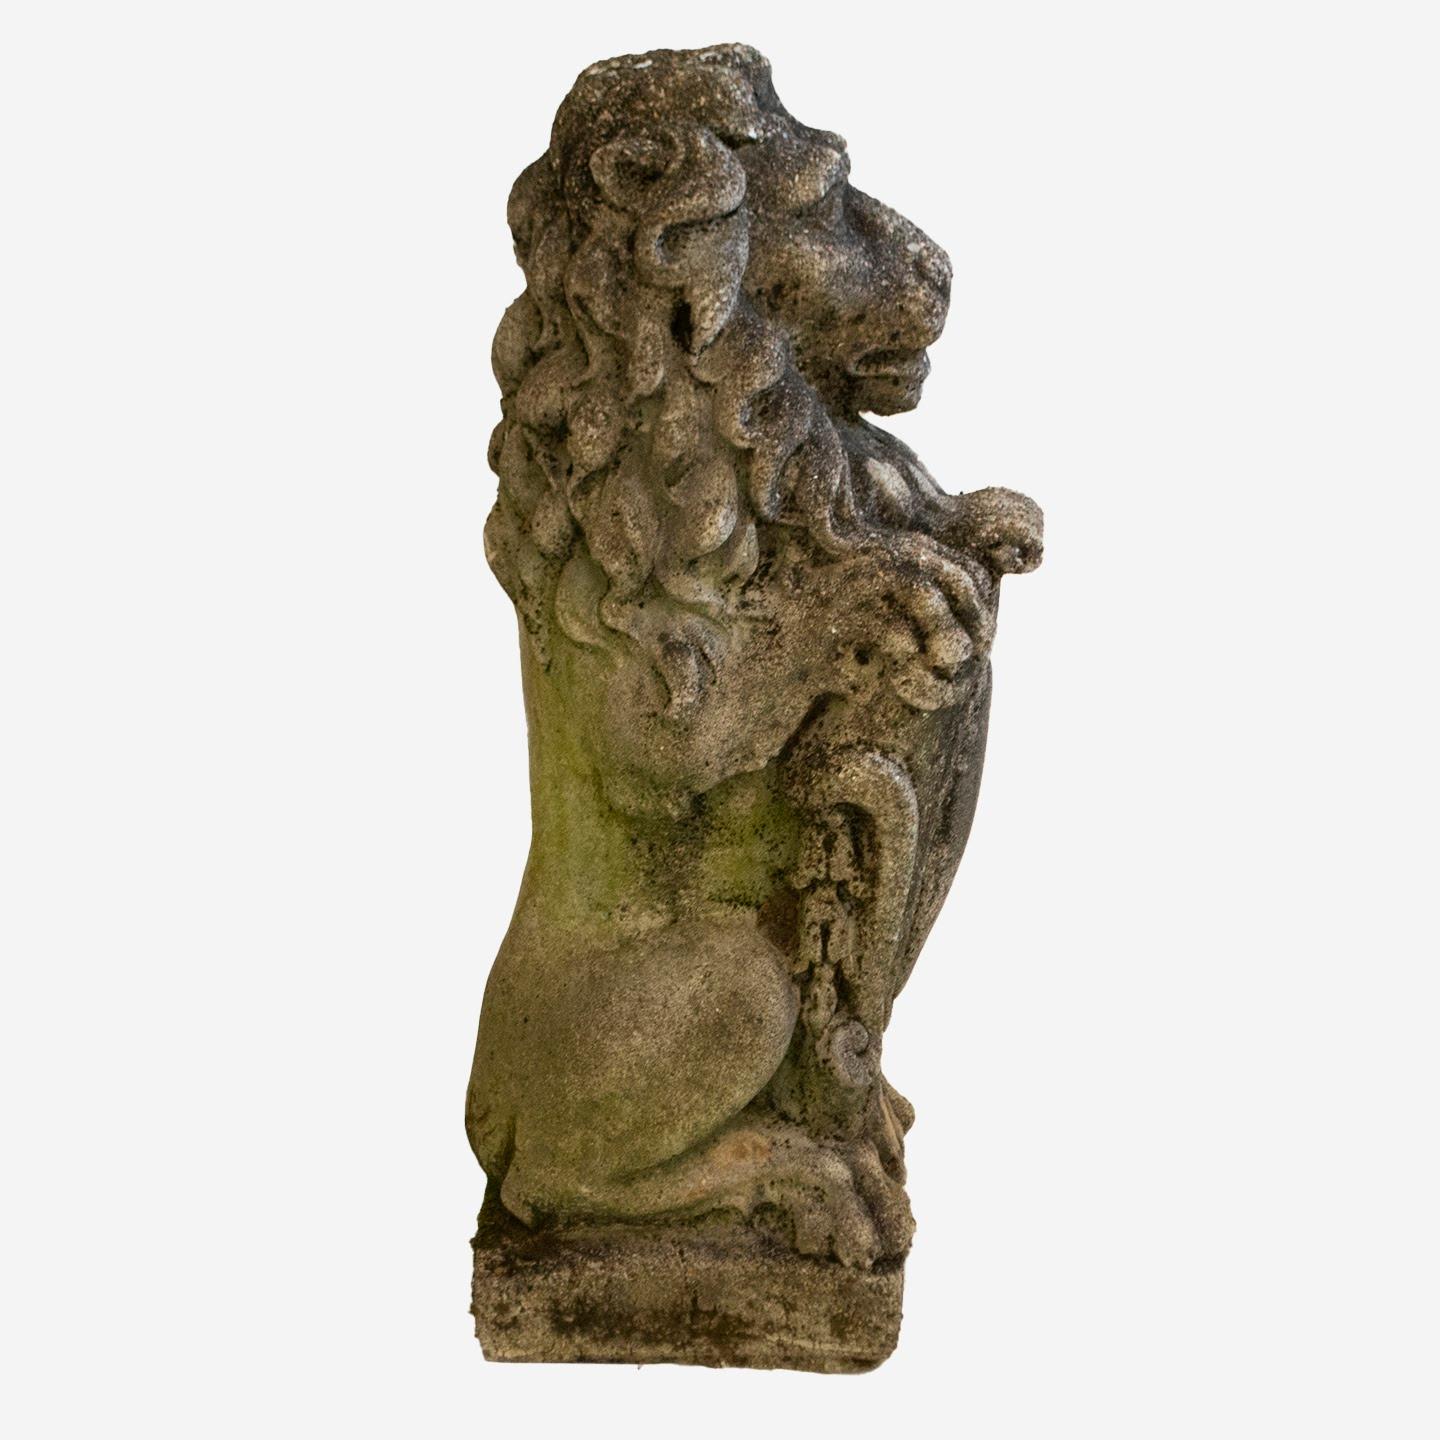 A pair of French carved cast stone lion garden statues from the 20th century, attributed to Antonio de Simone. These scrolled shield bearing lions are cast in a sitting position, with head facing forward with long, wavy mane and tail curled along